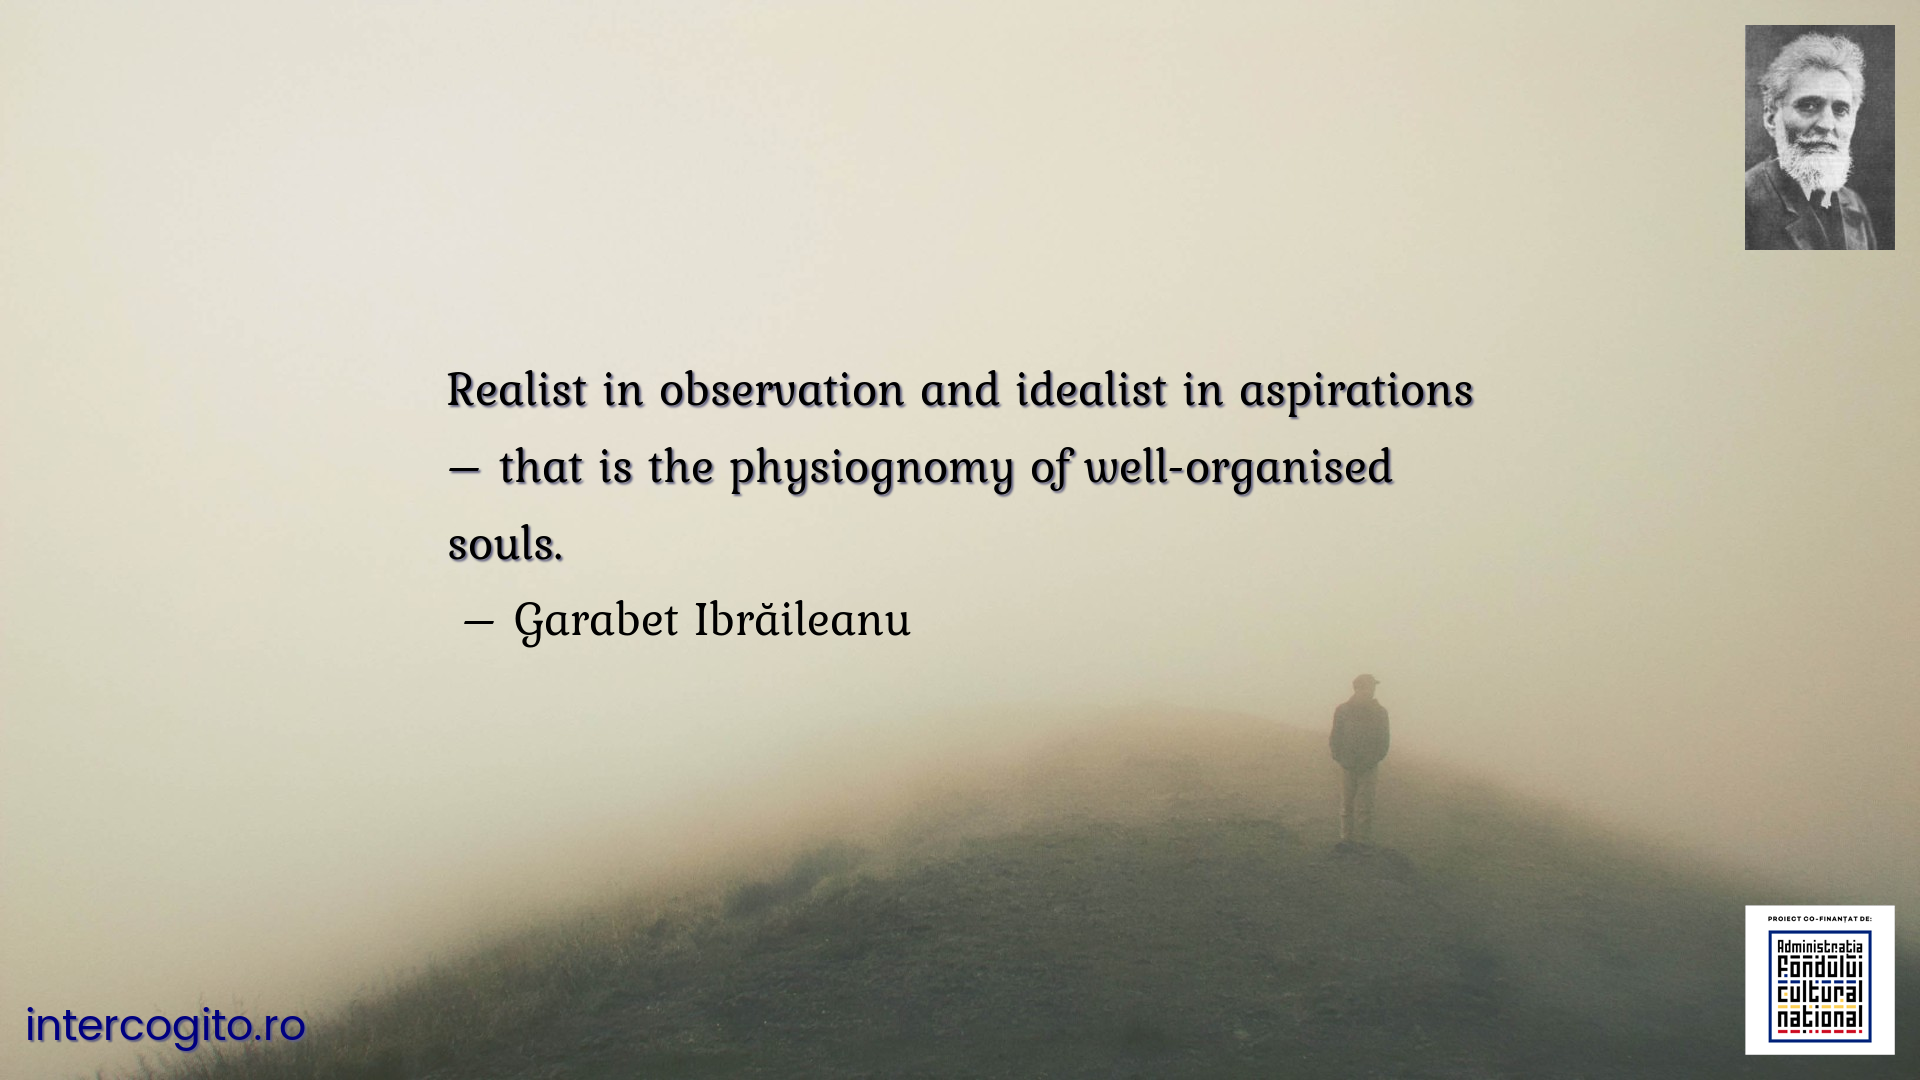 Realist in observation and idealist in aspirations – that is the physiognomy of well-organised souls.